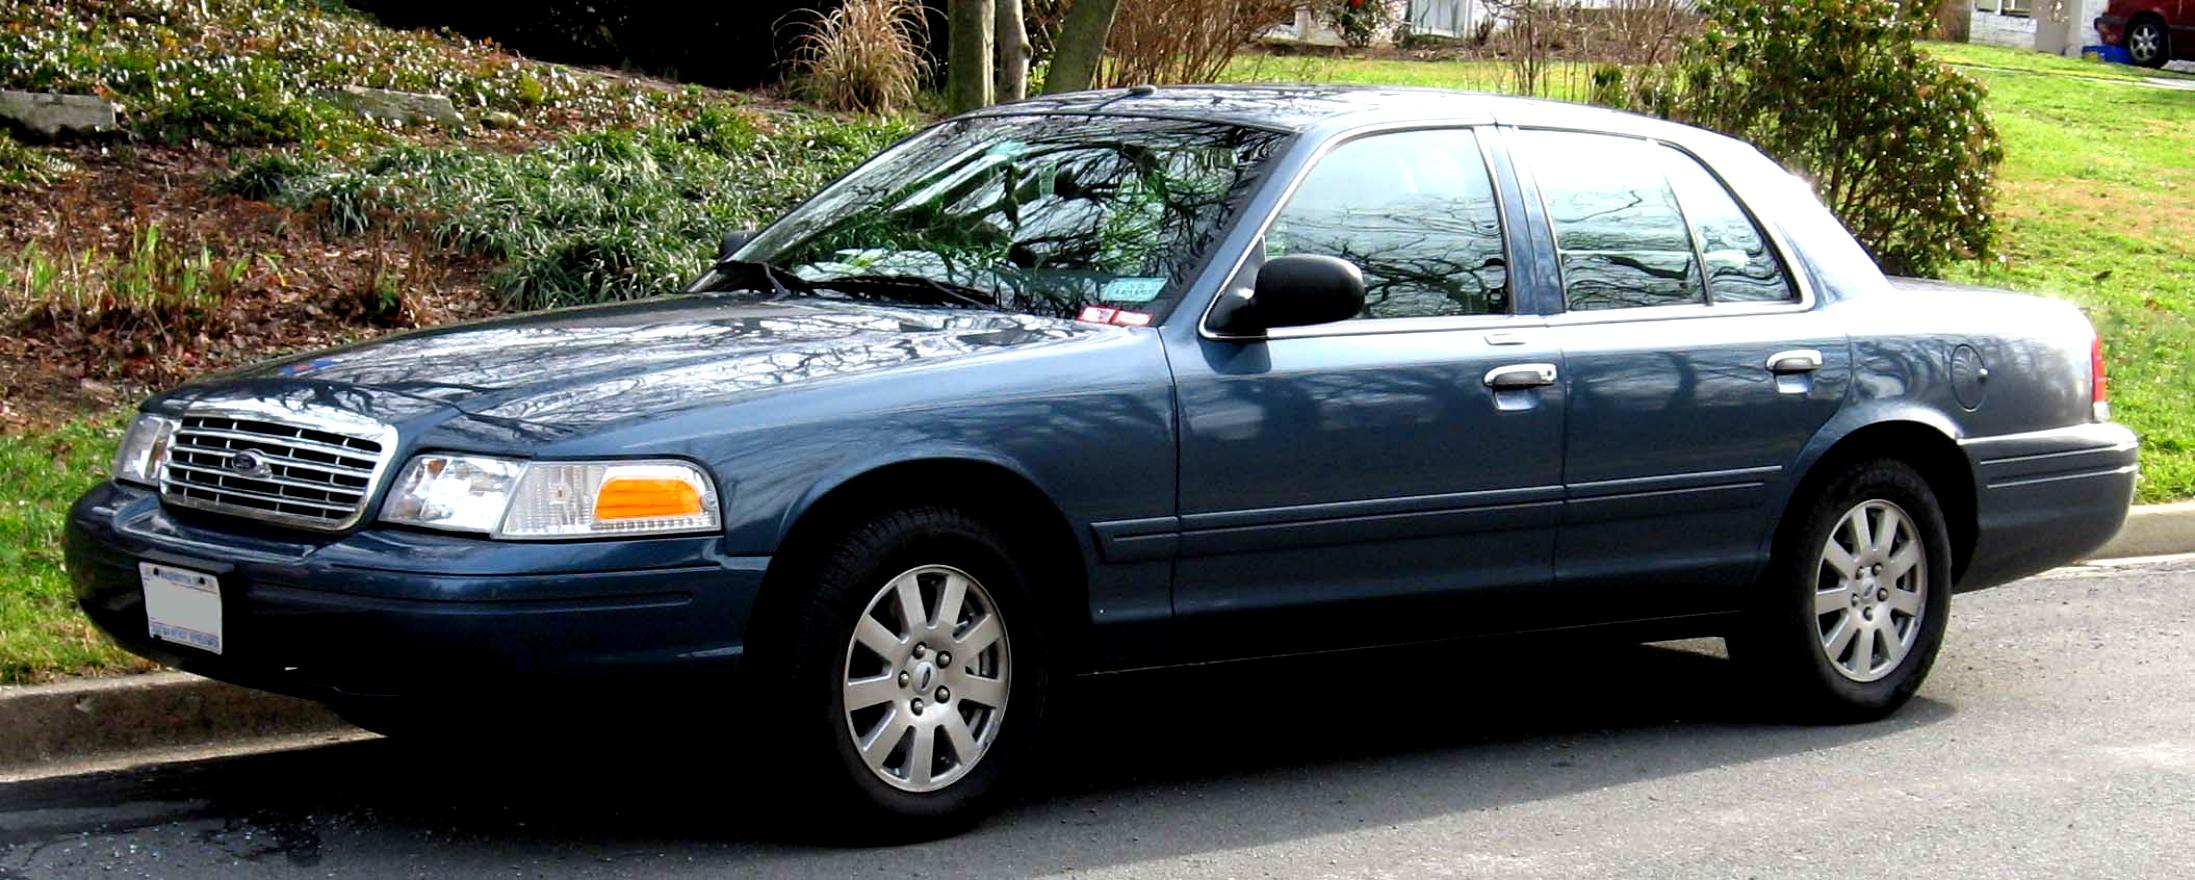 Ford Crown Victoria 1998 #2